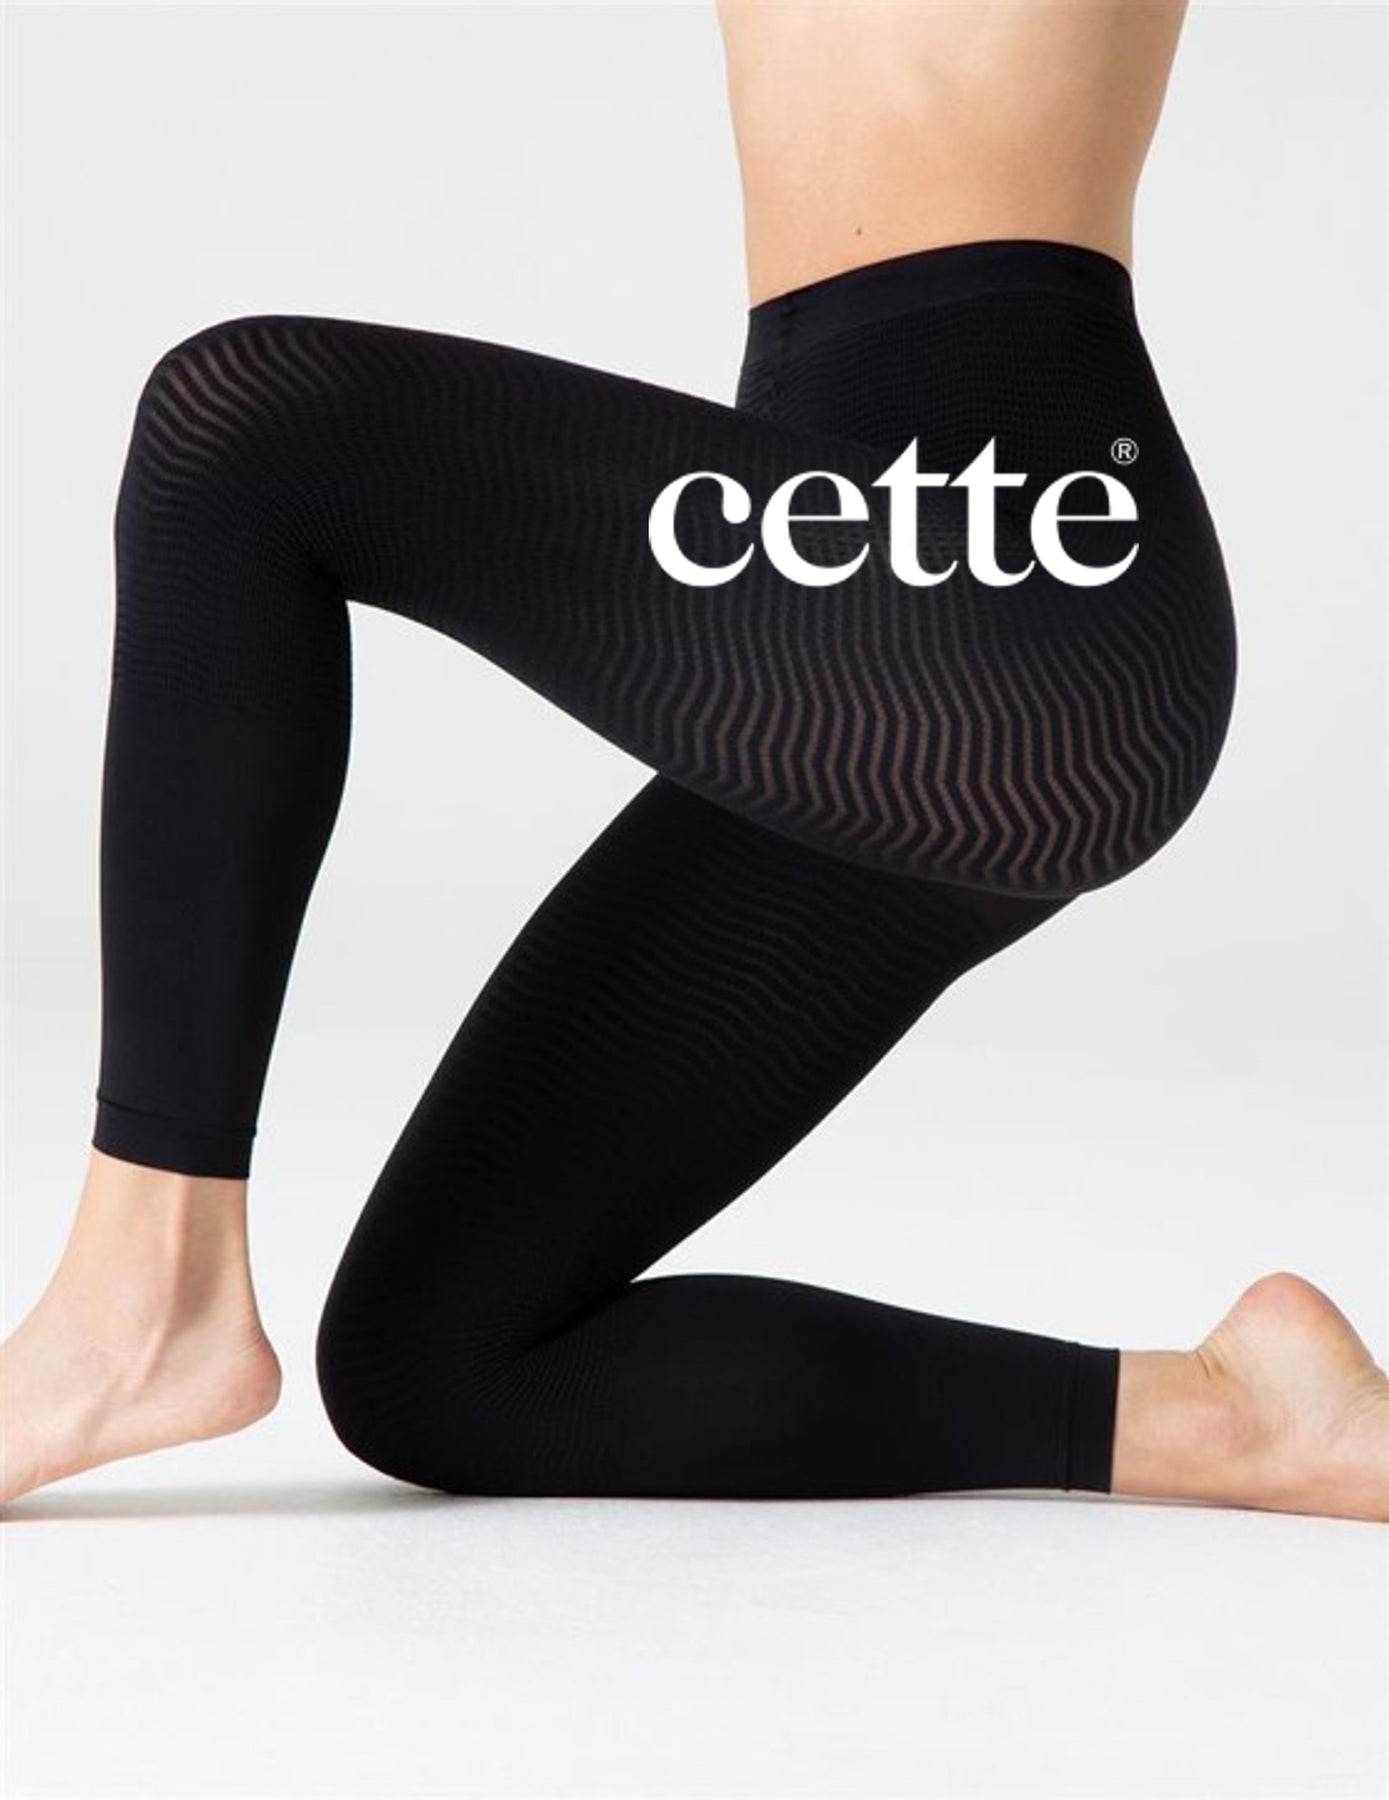 Cette Footless Tights